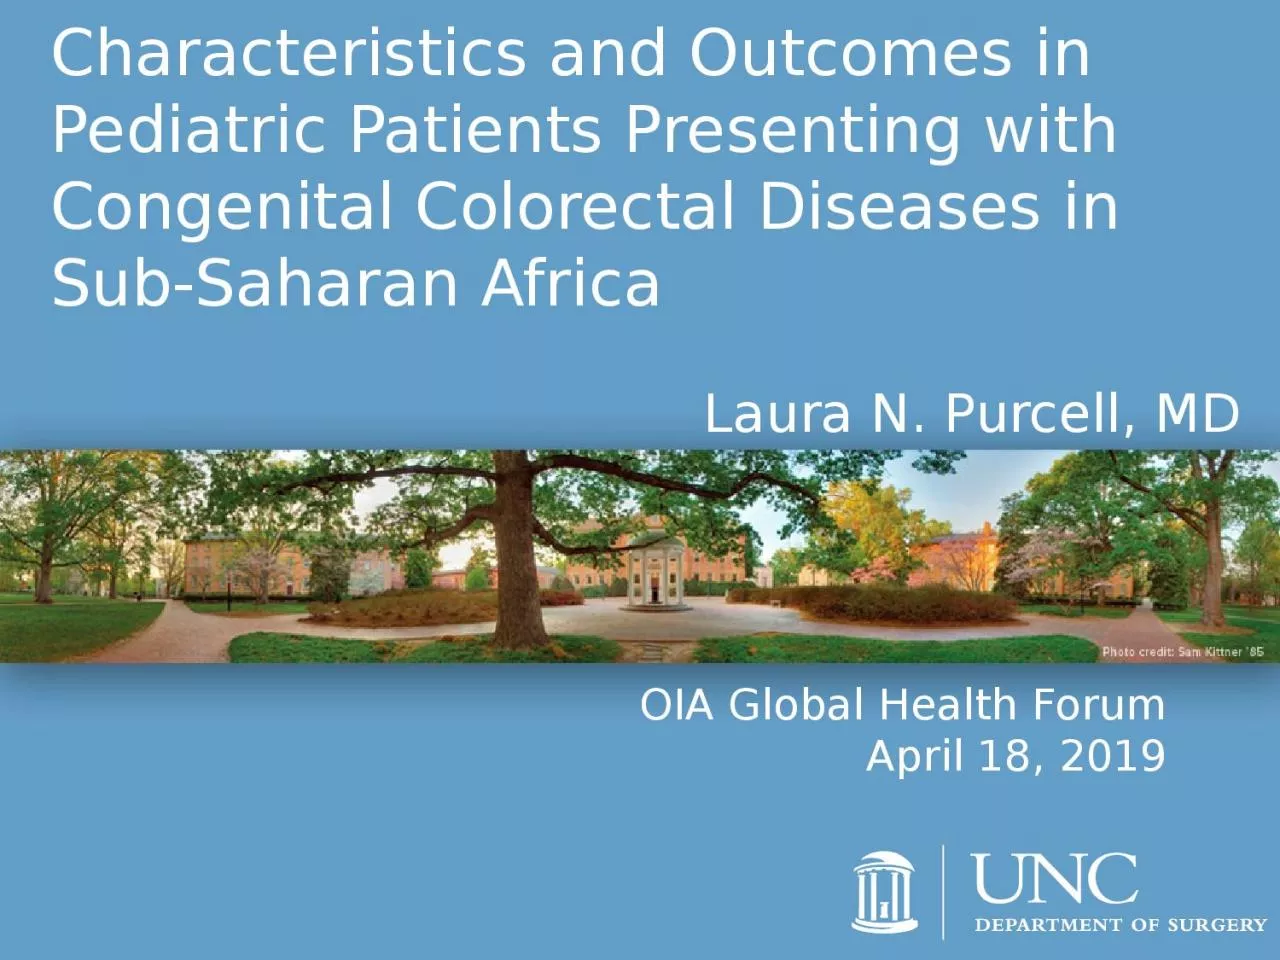 Characteristics and Outcomes in Pediatric Patients Presenting with Congenital Colorectal